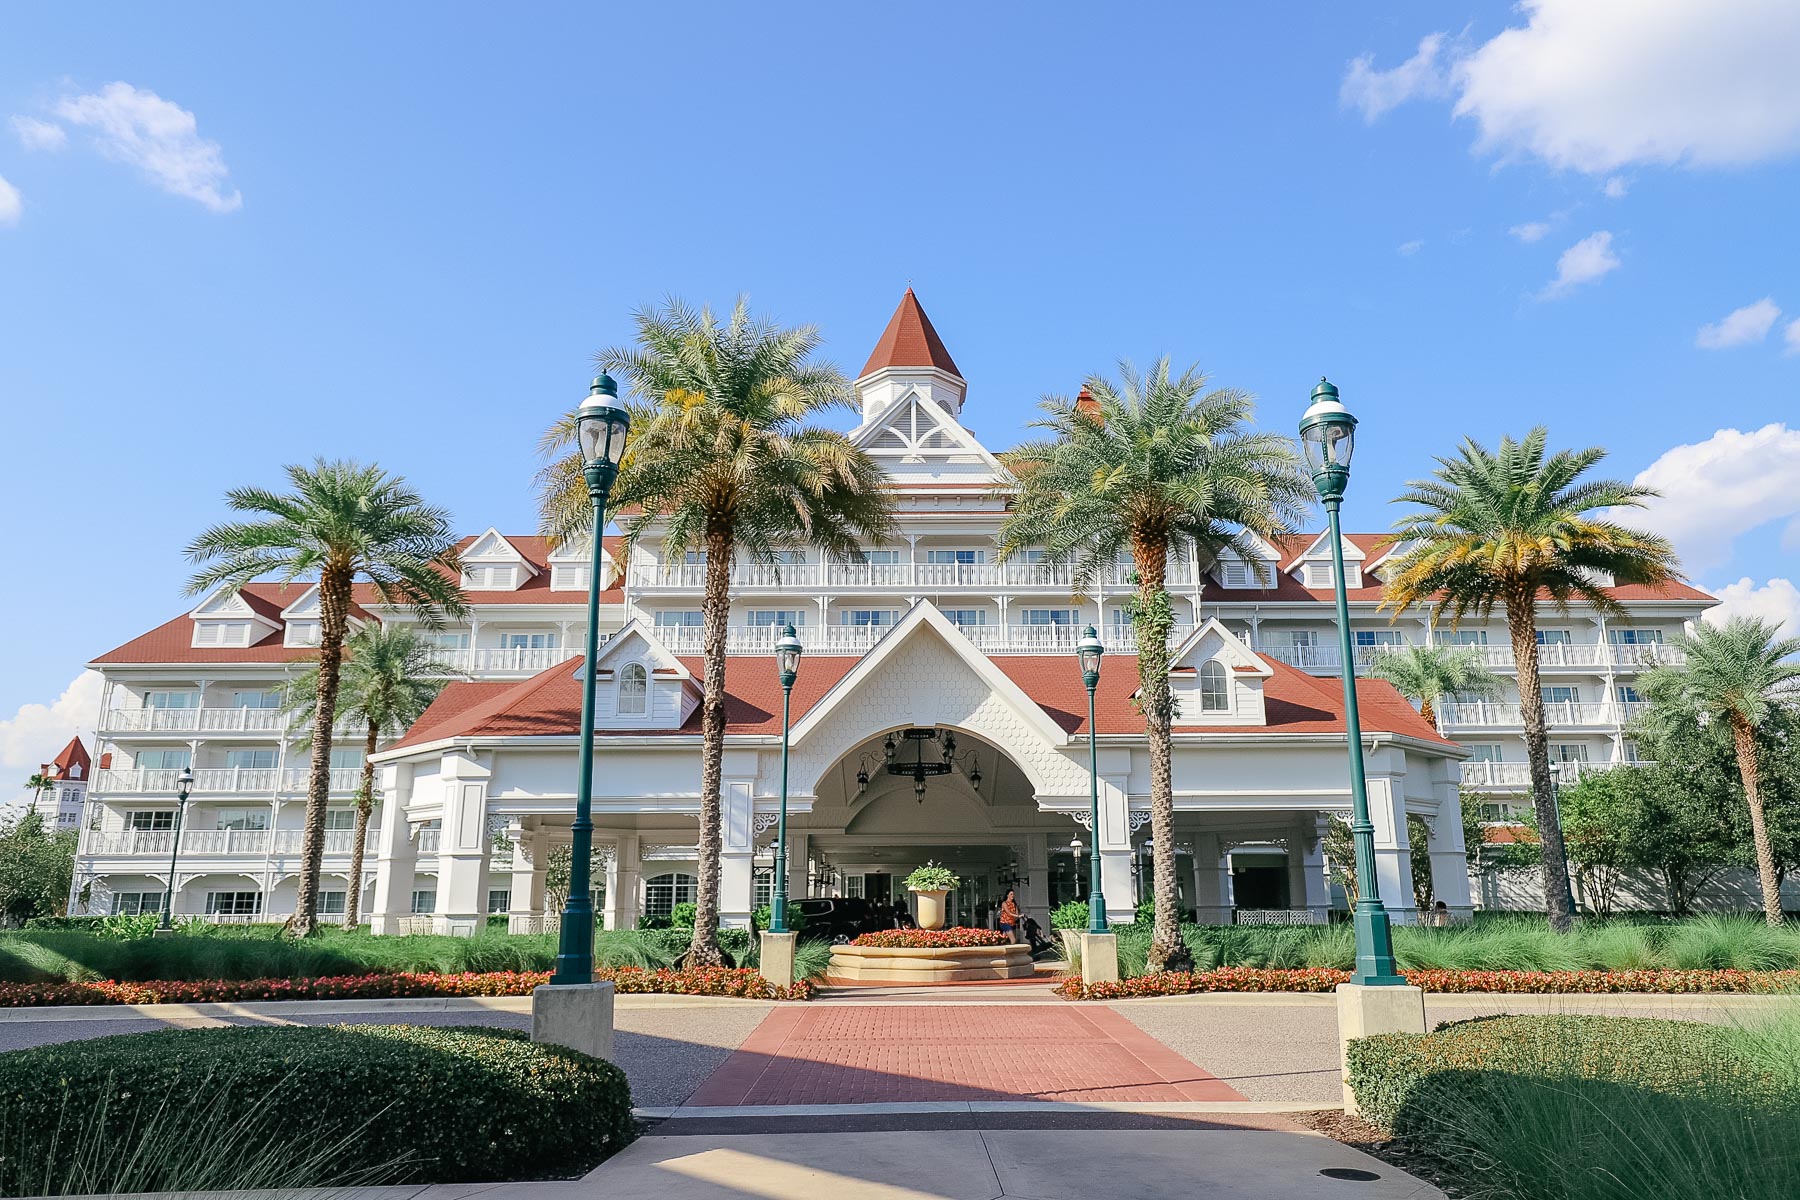 Disney's Grand Floridian Villas Building with red roof and palm trees 